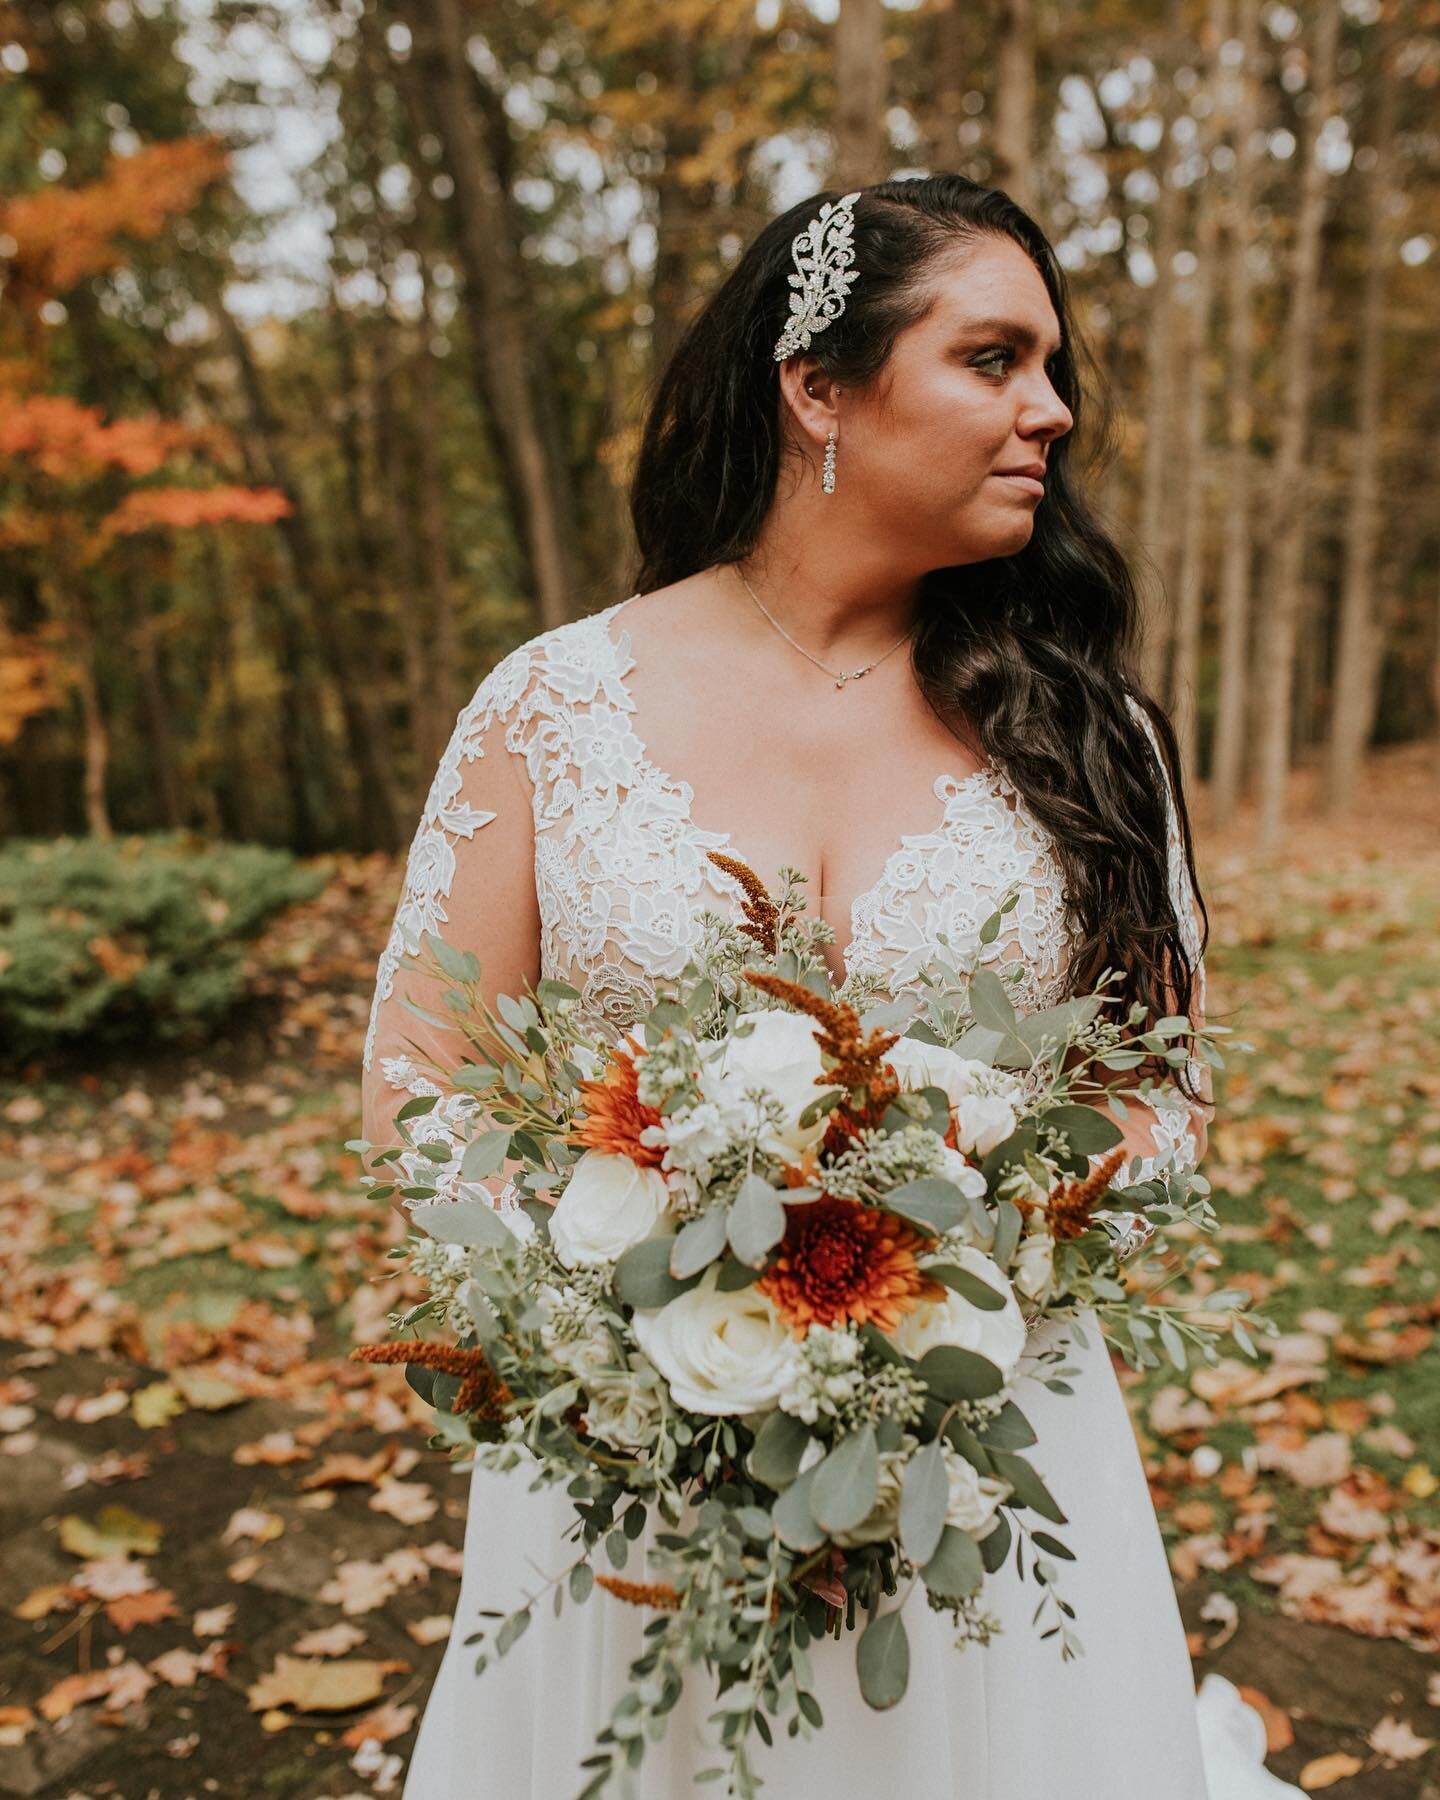 thinking back on 2021 with so much gratitude. a highlight was this AMAZING fall wedding in the peak of autumn color glory!! so many special moments from this day! I can&rsquo;t wait for more weddings in 2022! Reach out to chat with me if you&rsquo;re